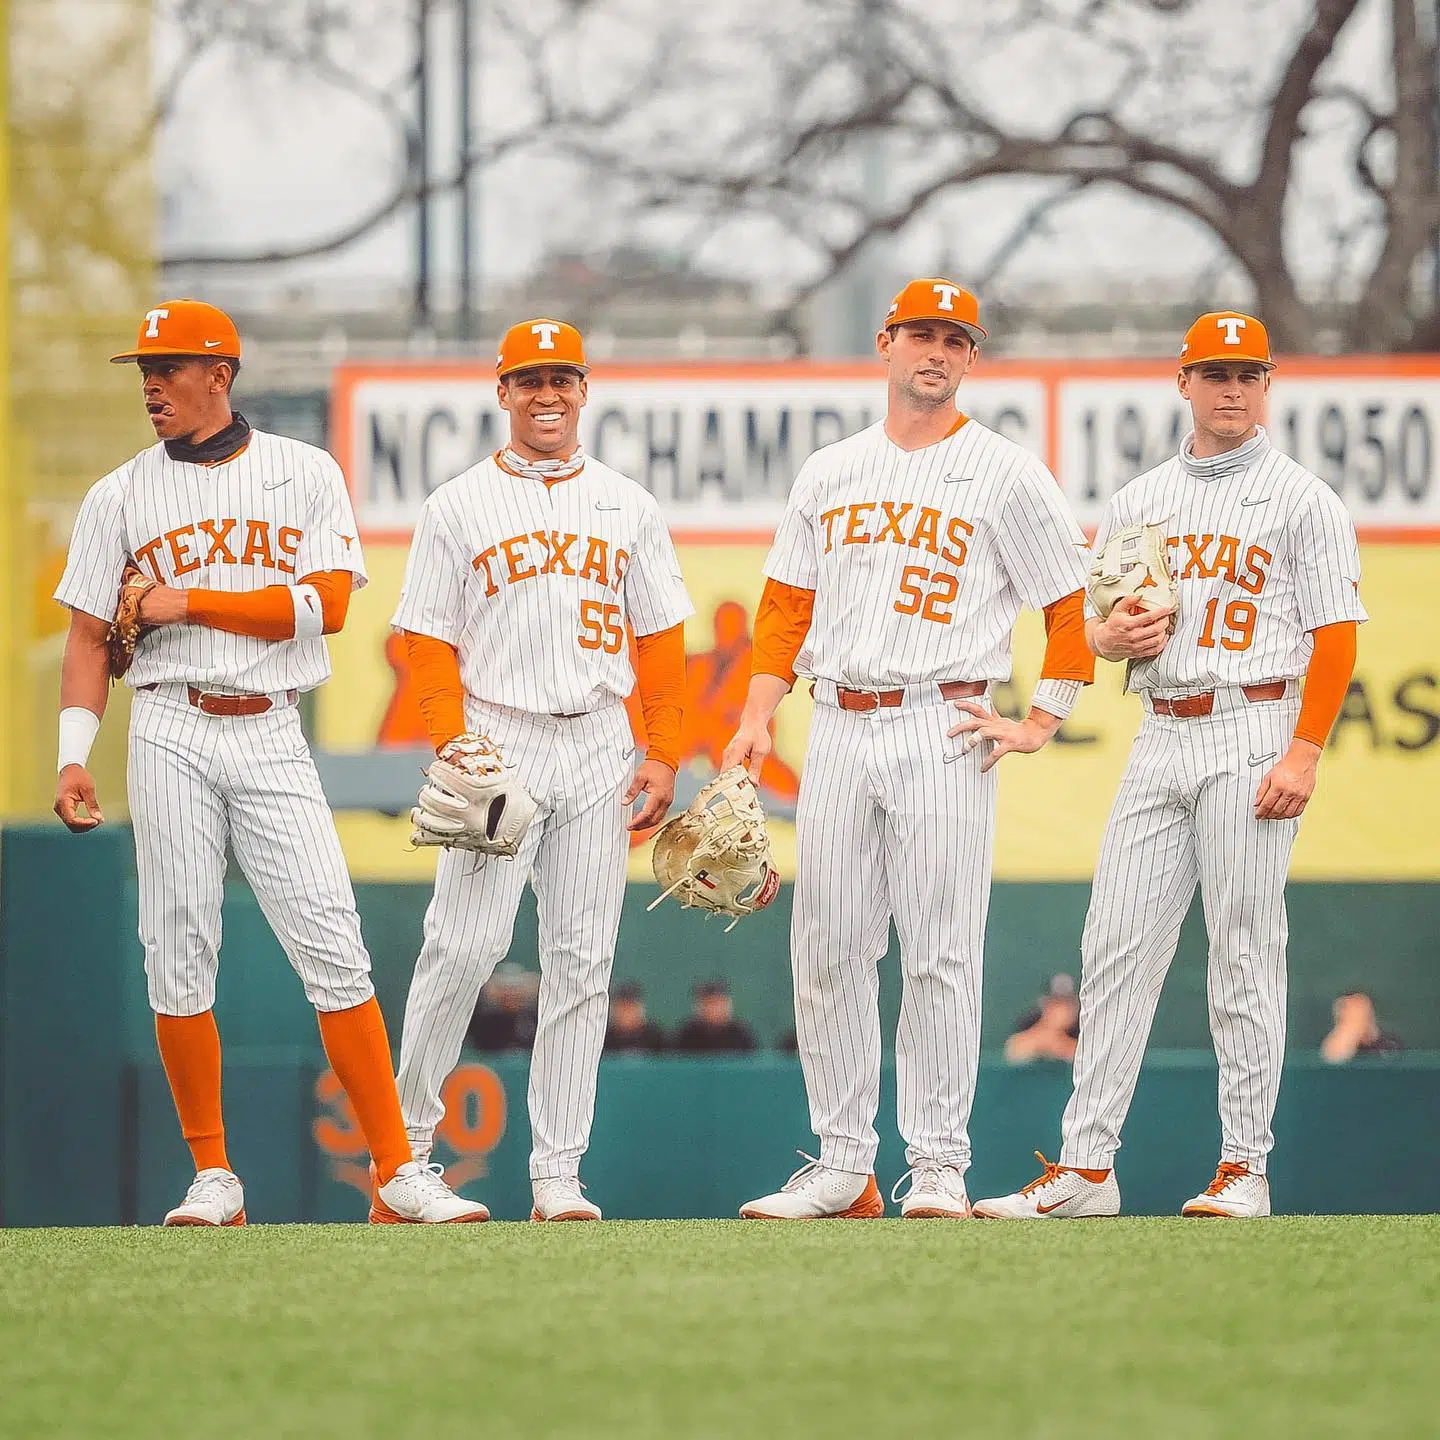 Join Texas Athletics in giving the Horns a Texassized sendoff as they